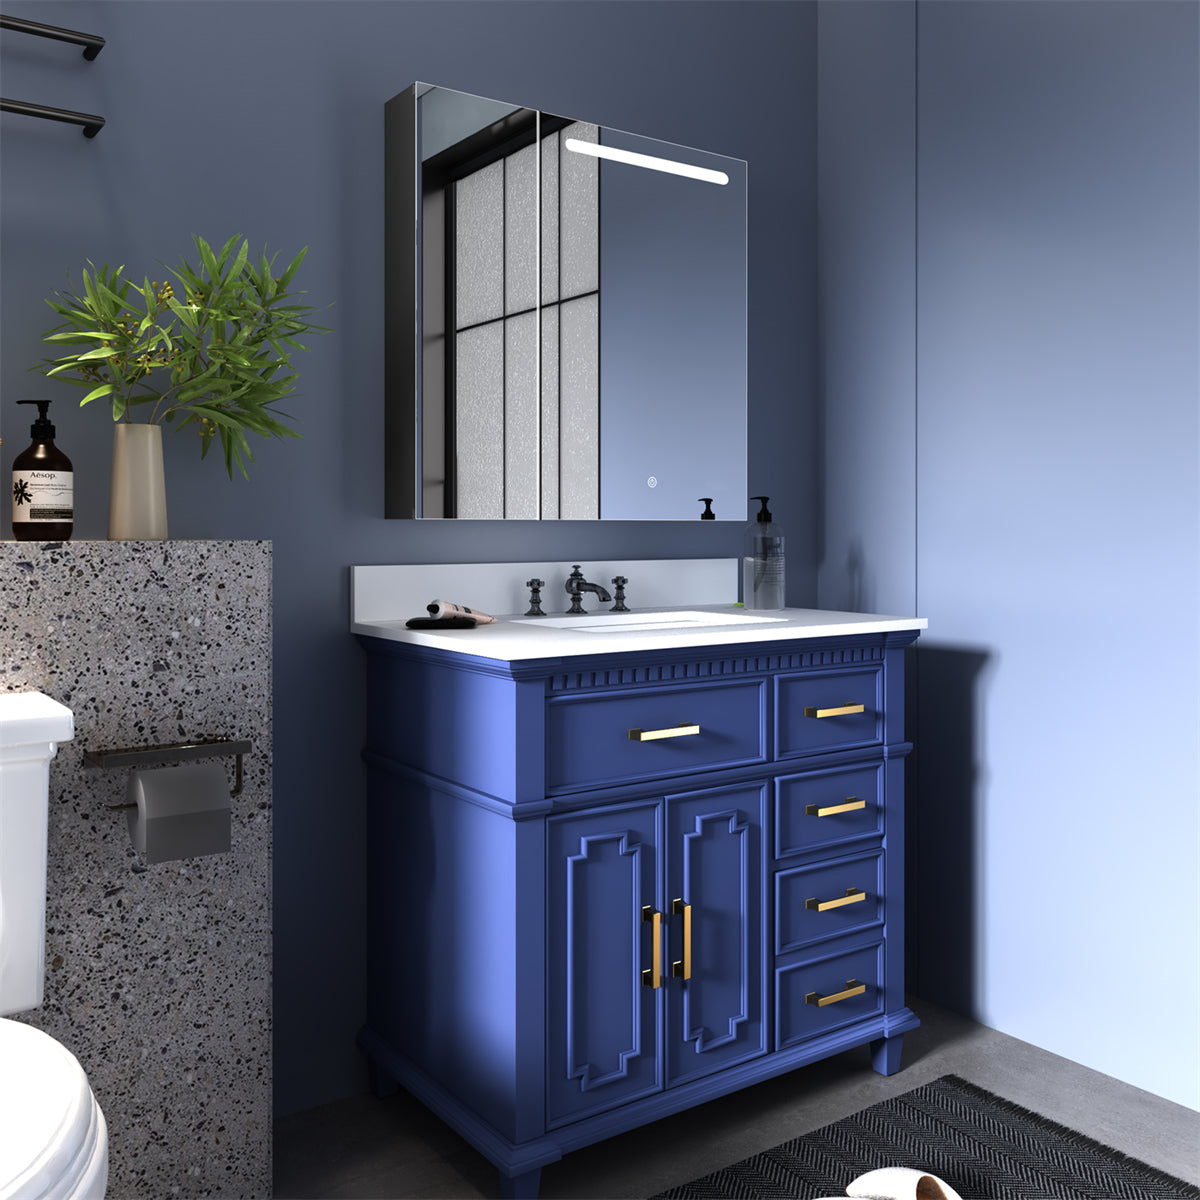 ExBrite 30 x 30 inch Bathroom Medicine Cabinets Surface Mounted Cabinets With Lighted Mirror